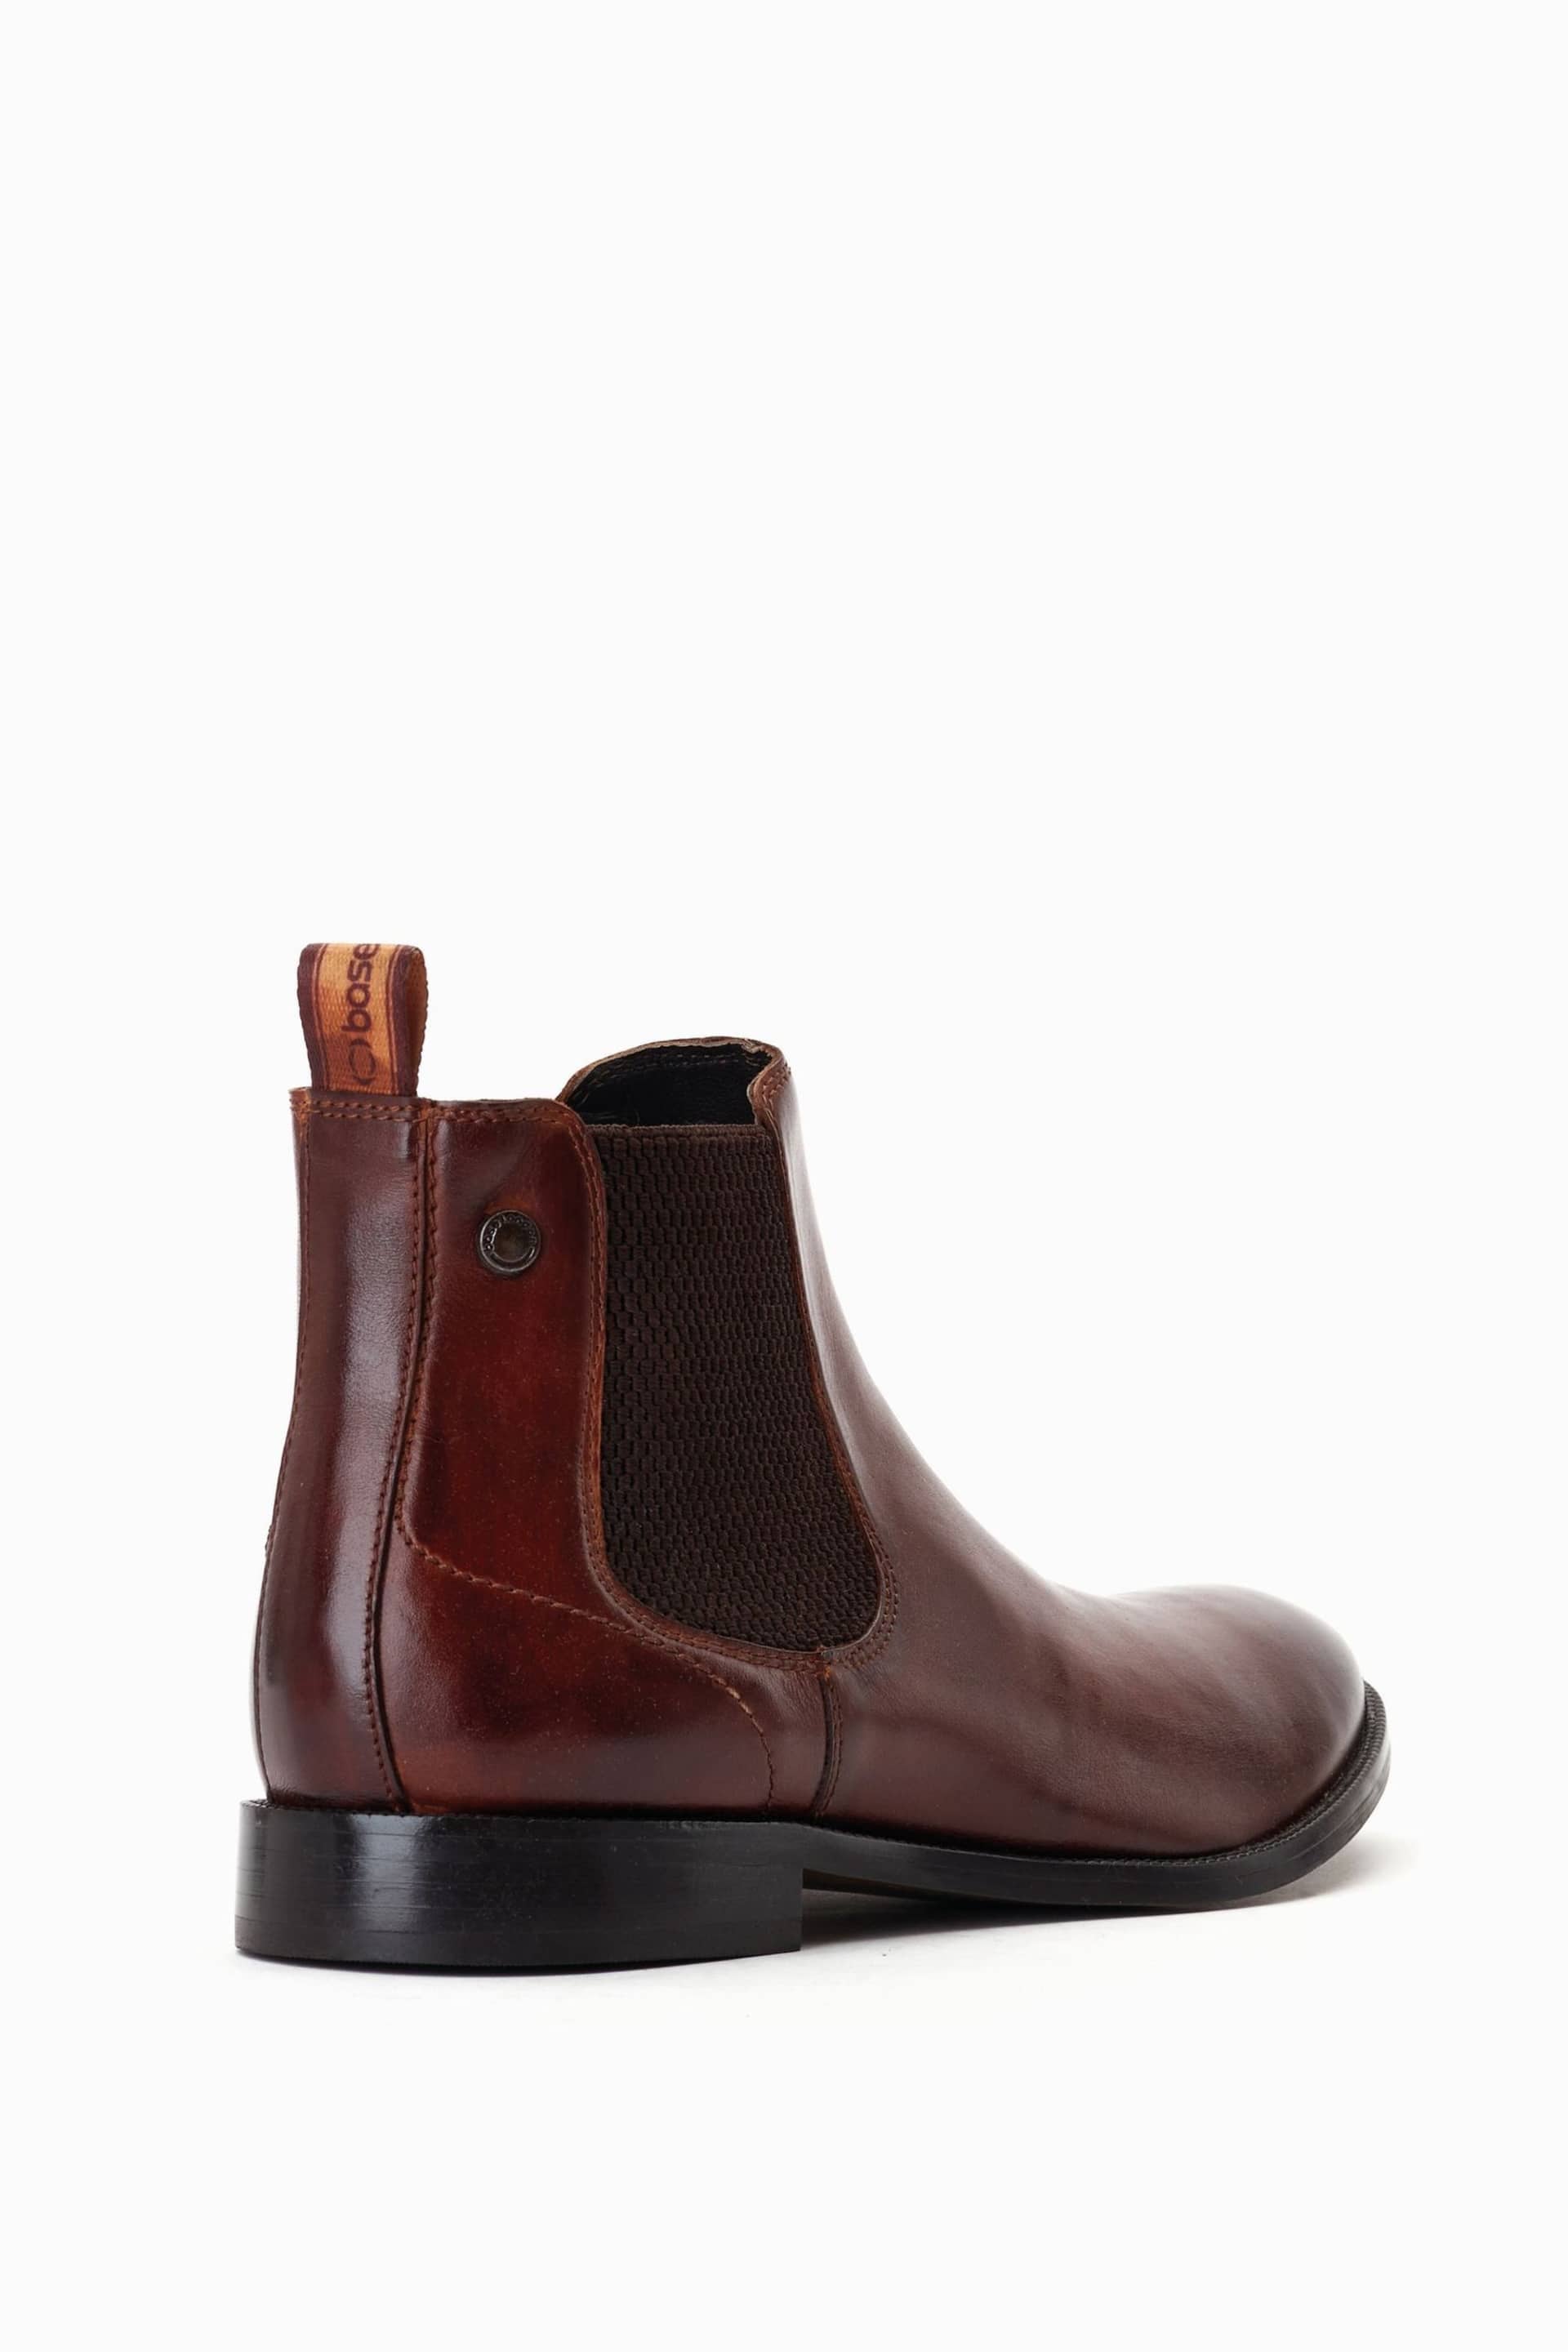 Base London Carson Pull On Chelsea Boots - Image 2 of 6